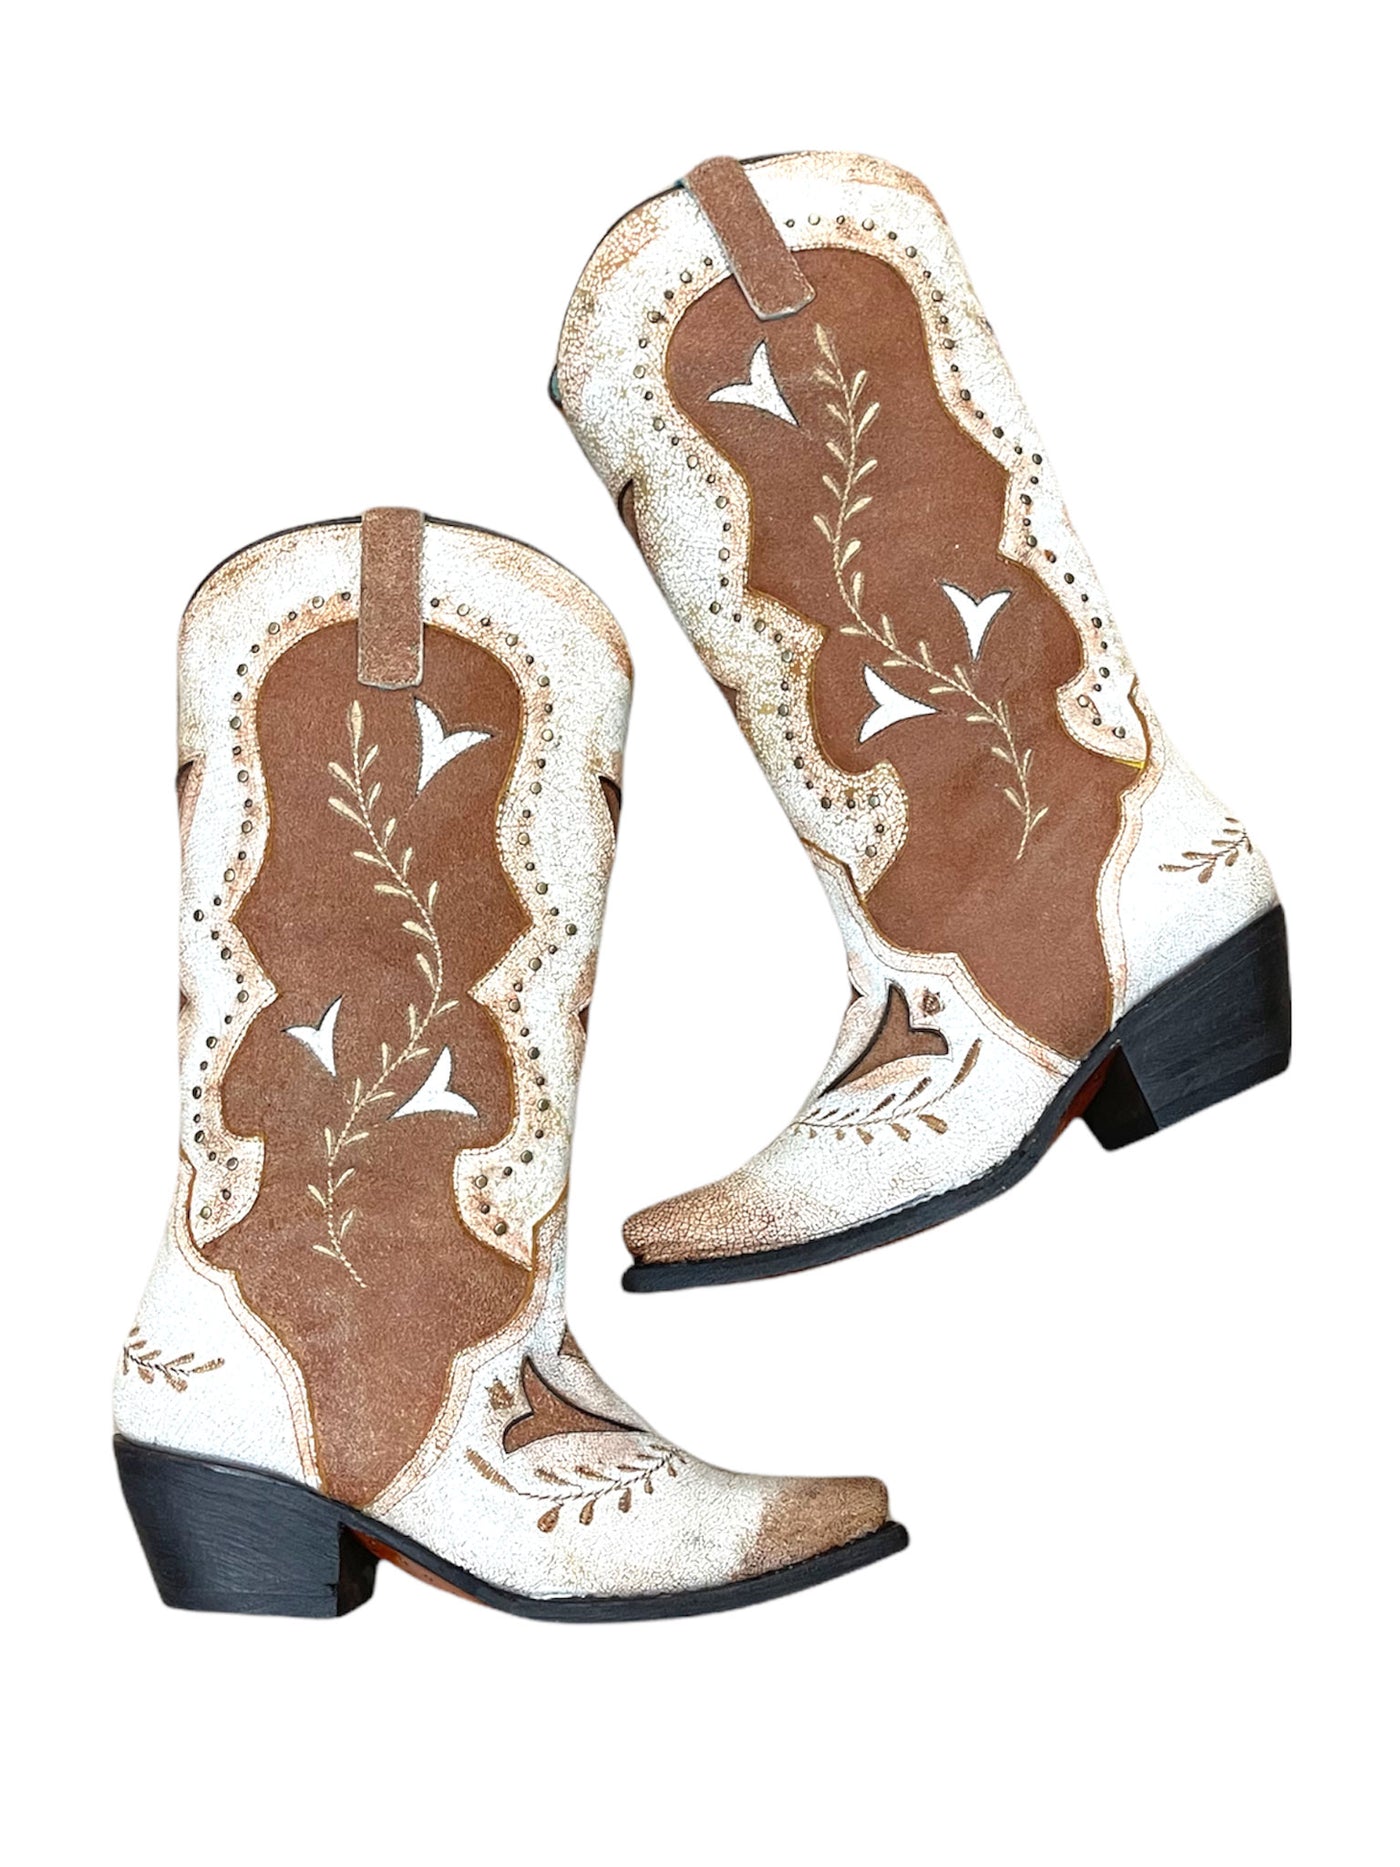 Corral Brown Embroidery Cowboy Boots